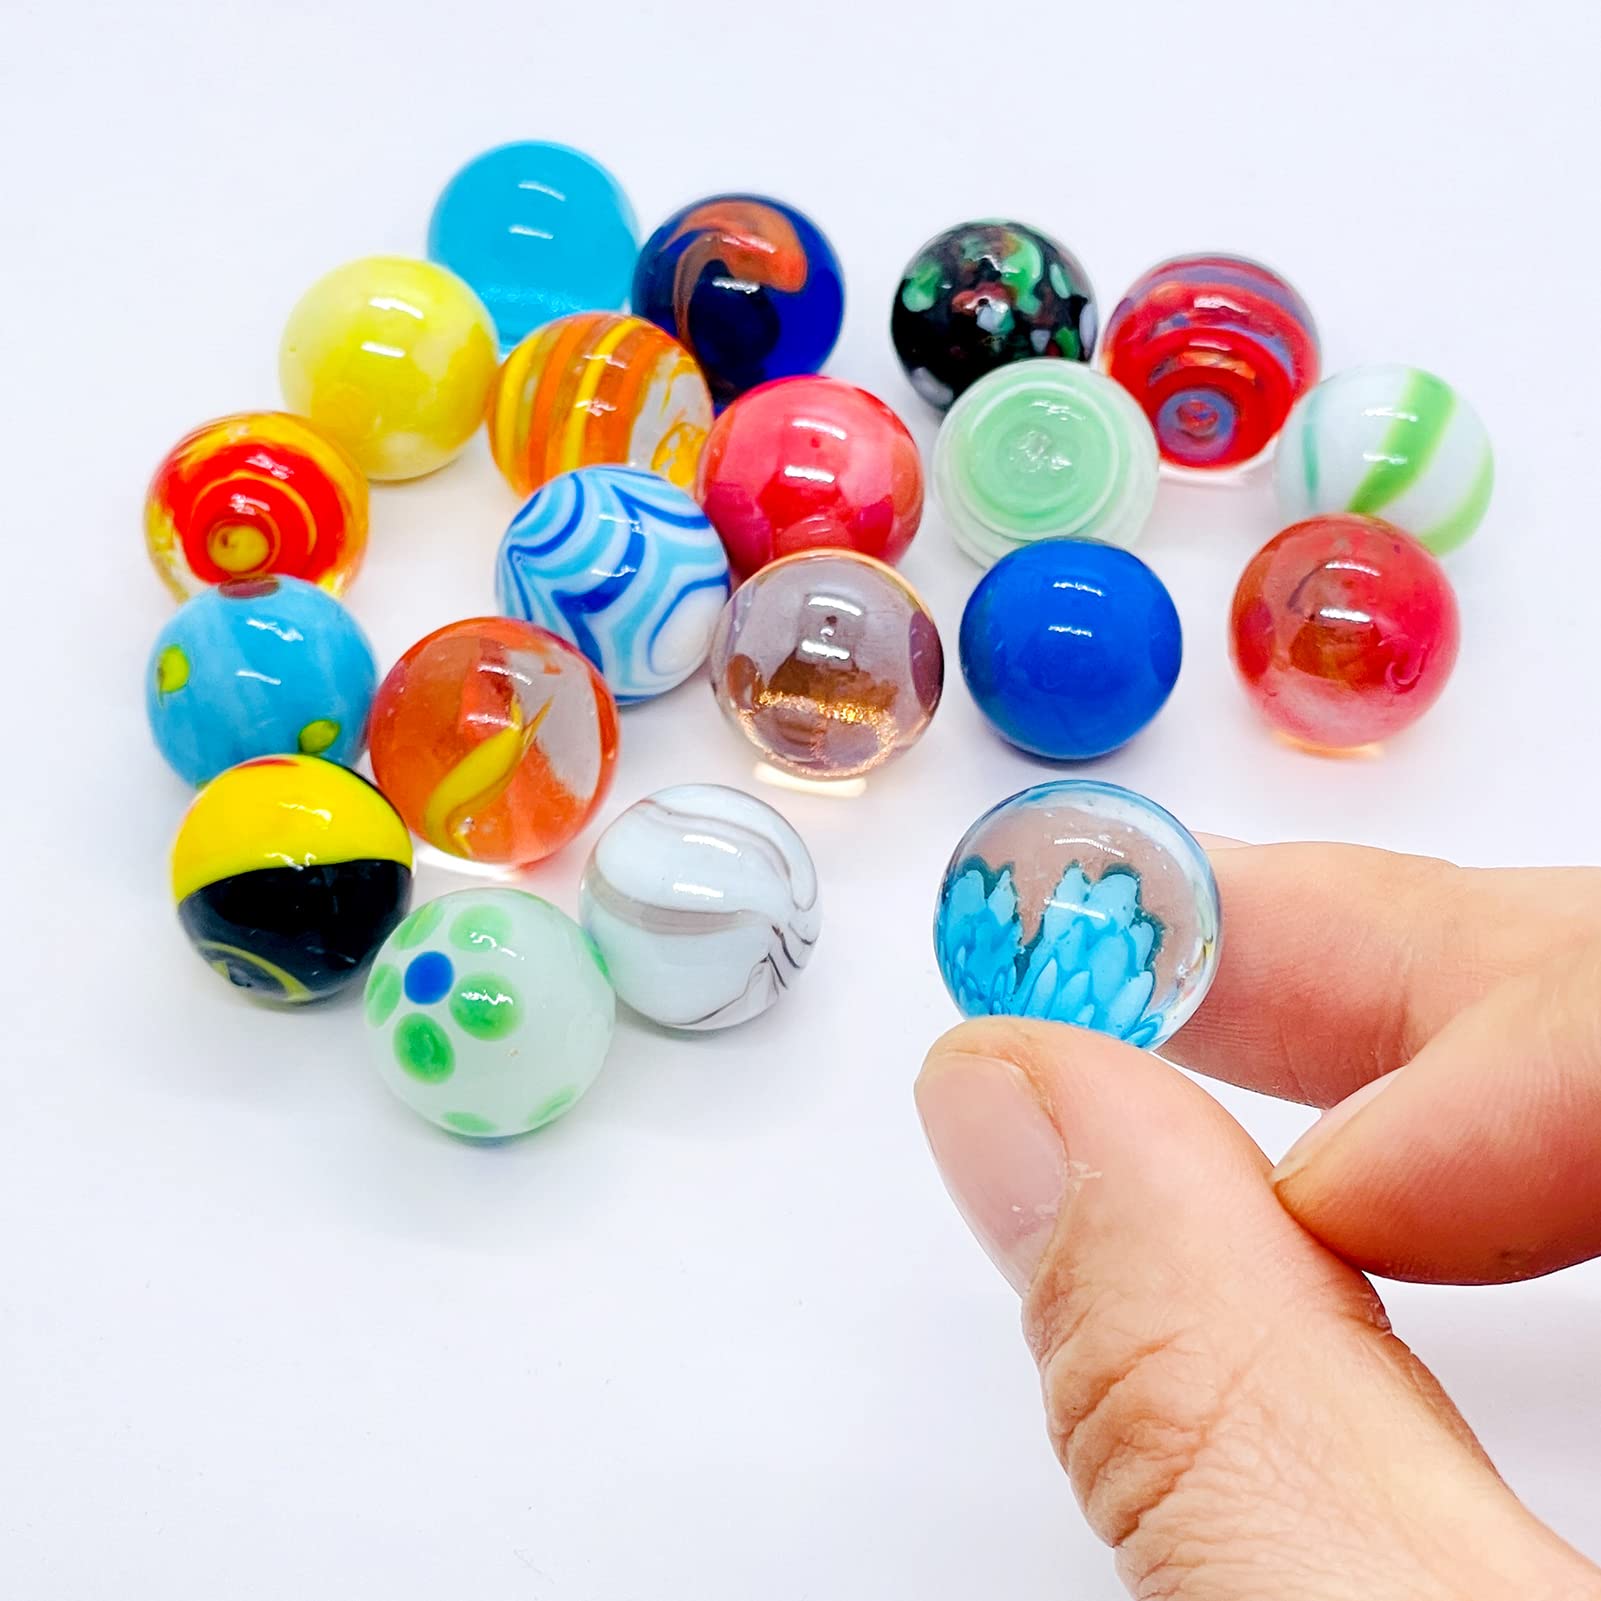 20pcs Beautiful Marbles for Kids Ages 6-8-12 Wonderful and Cheerful Colors Marble Shooters Run Track Game Small Marbles Game Toy (16cm)